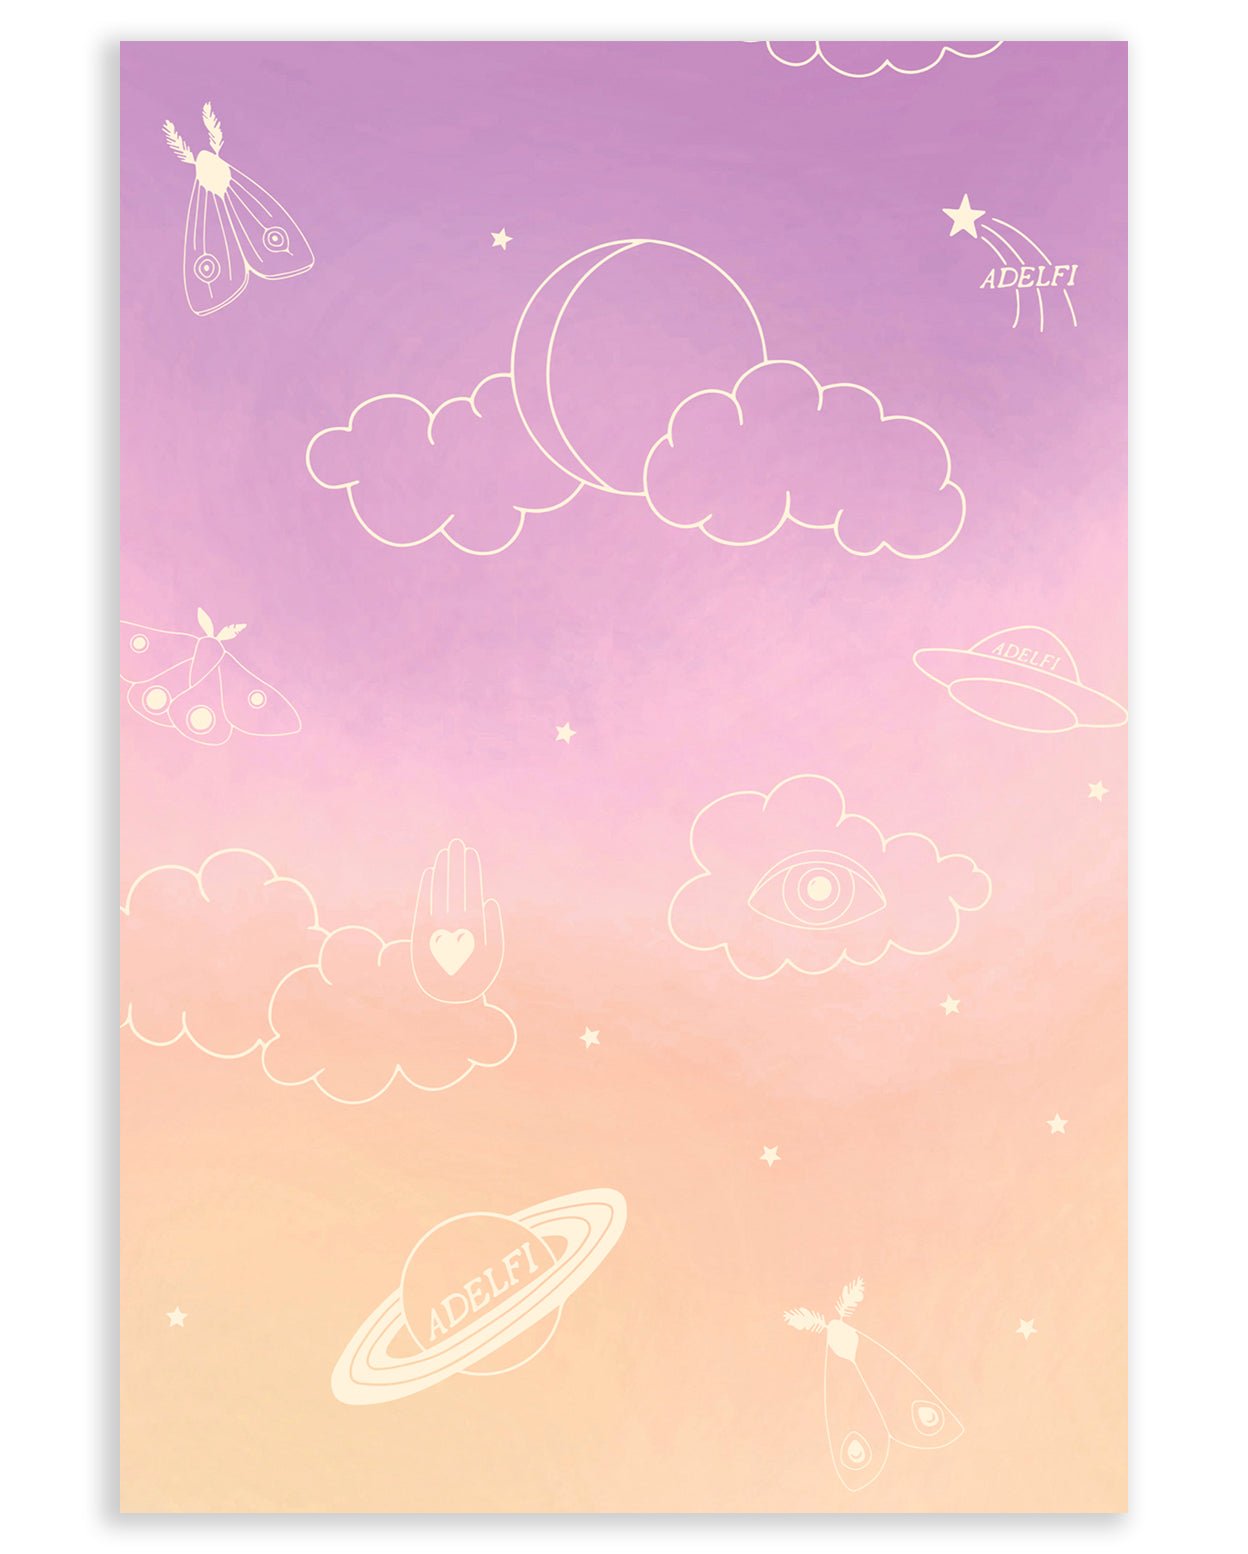 Hollow neon icons such as shooting stars, clouds, an Eclipse, Saturn, moths, a hand with a heart, and an evil eye on a purple and orange ombre background printed on cardstock against a white background.